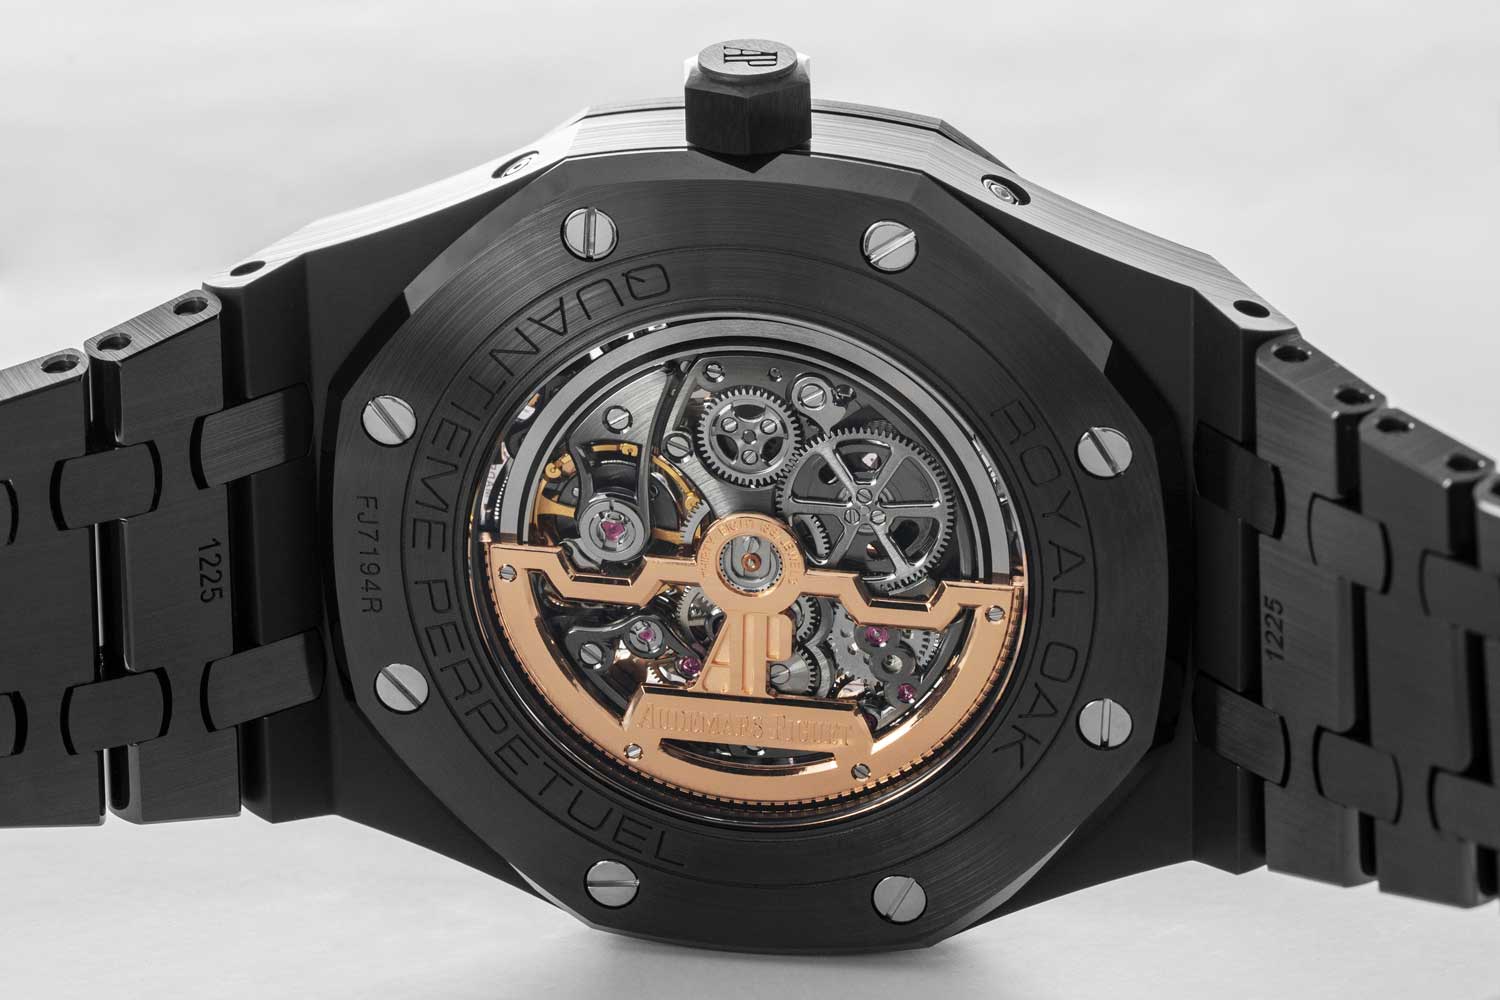 The new hand-finished Calibre 5135 (Image © Revolution)